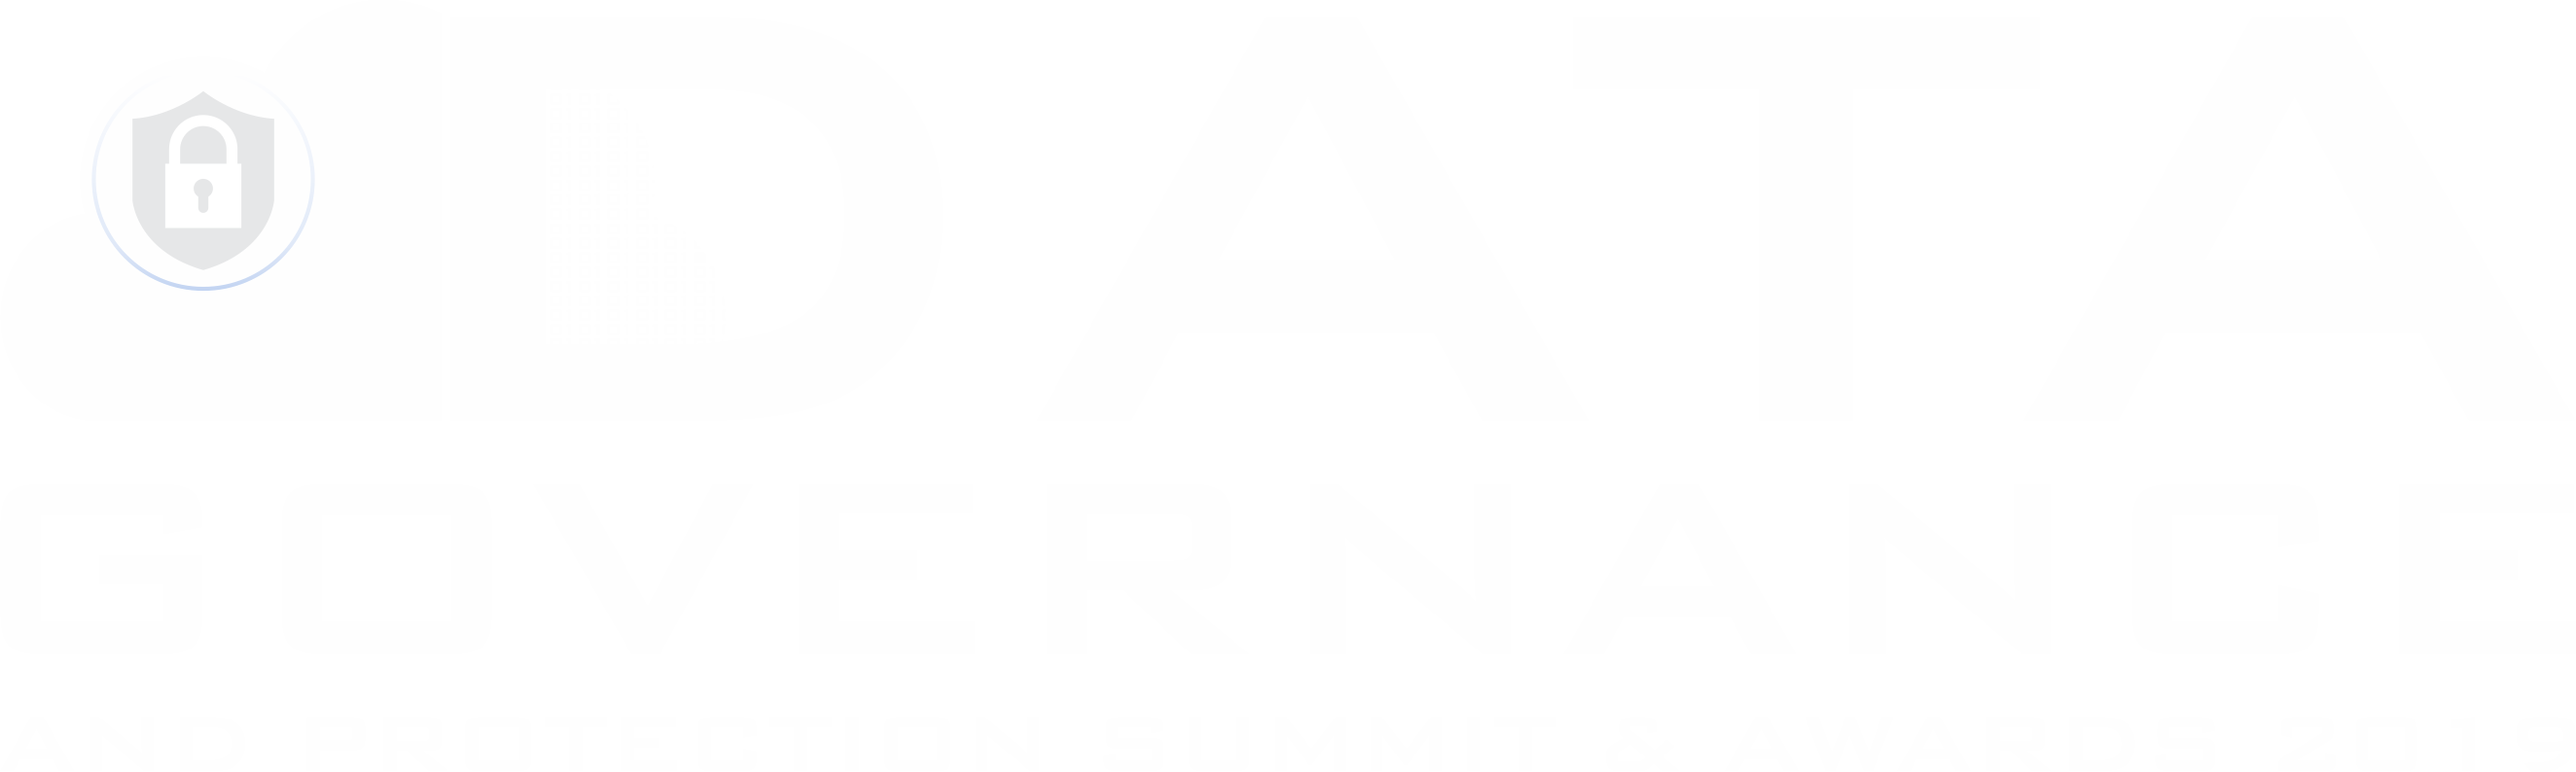 Data Governance and Protection Summit and Awards
2019